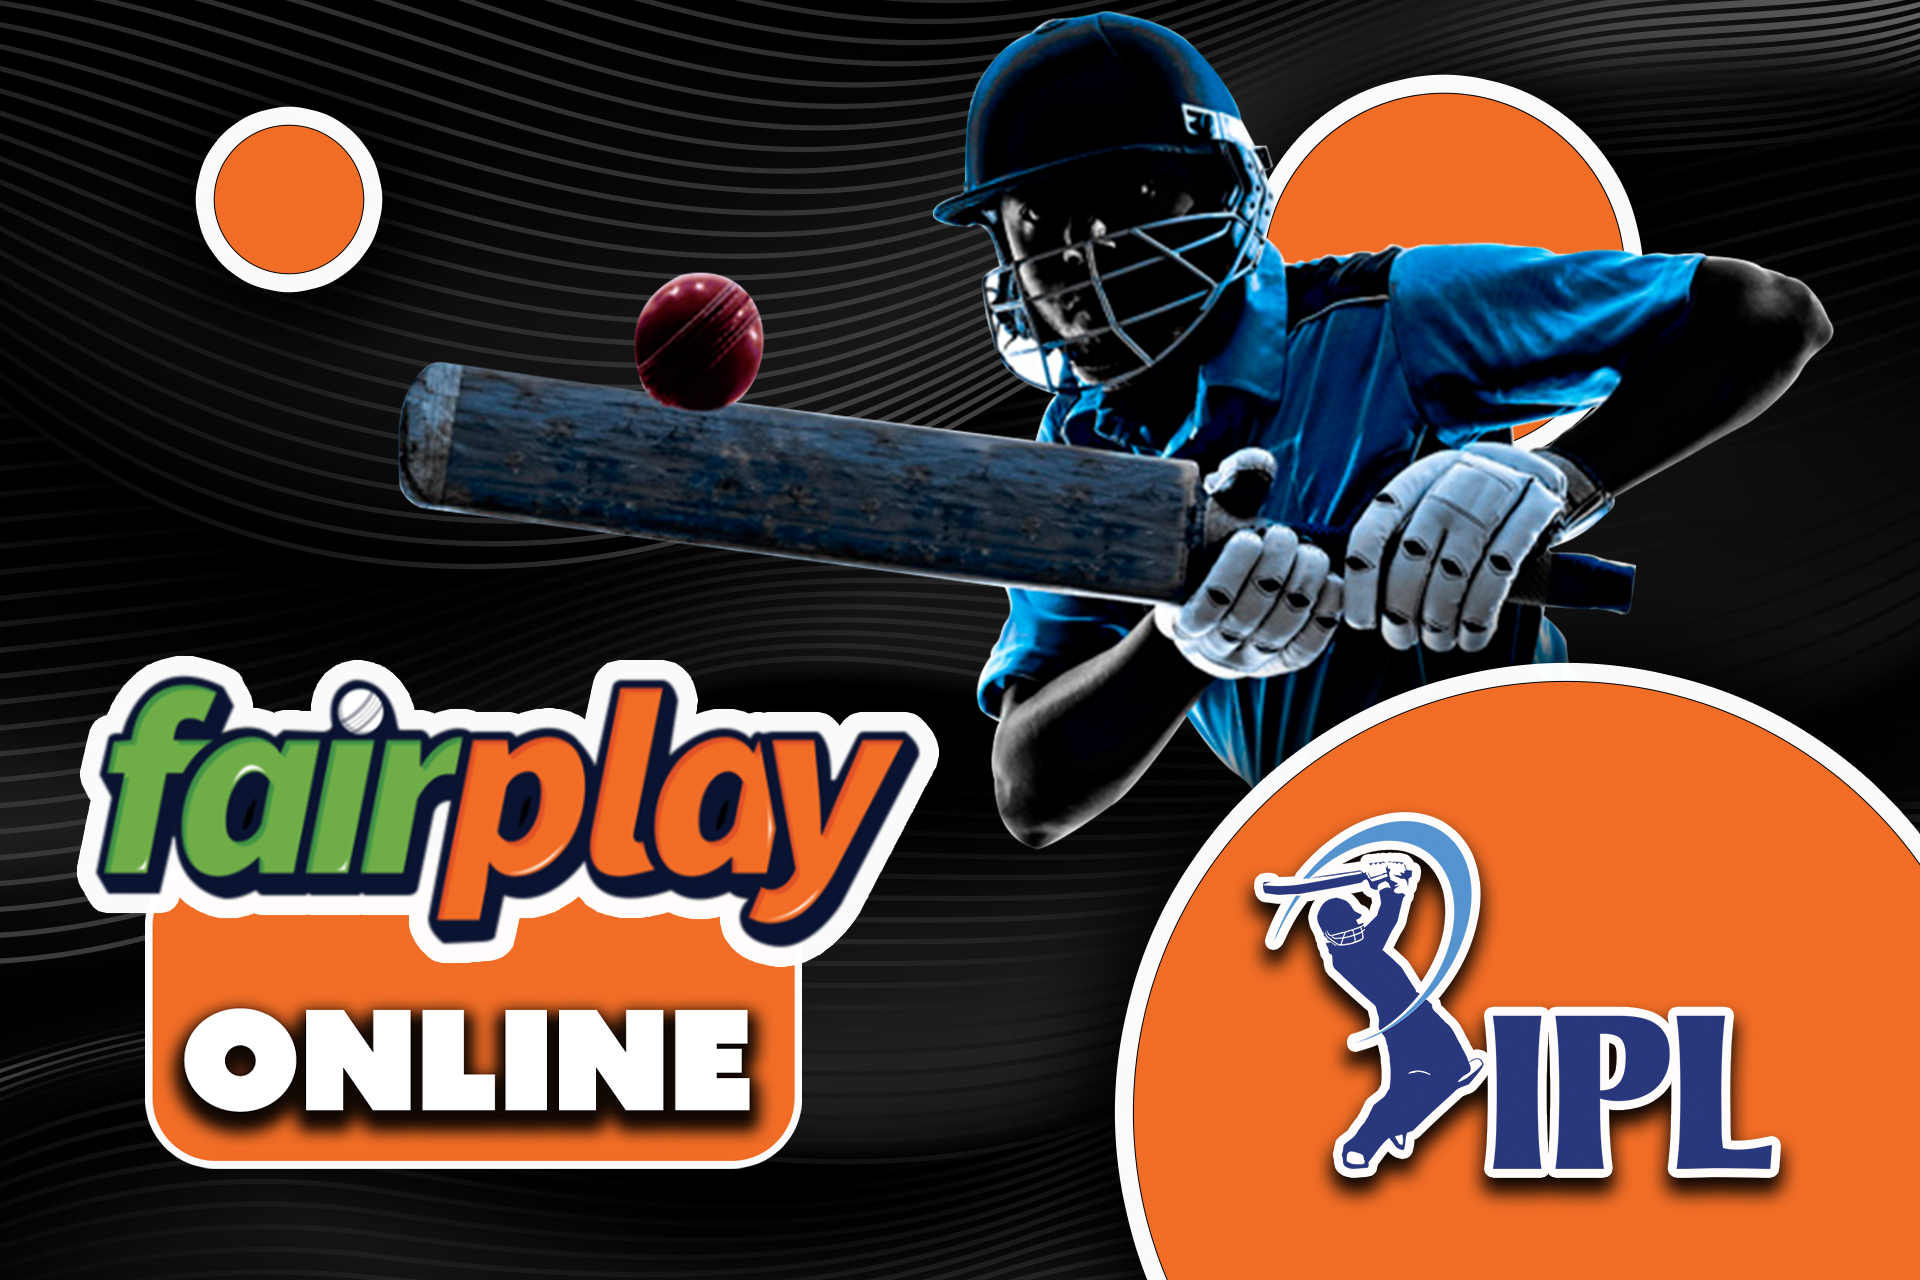 IPL live betting will be wonderful experience with the Fairplay app.